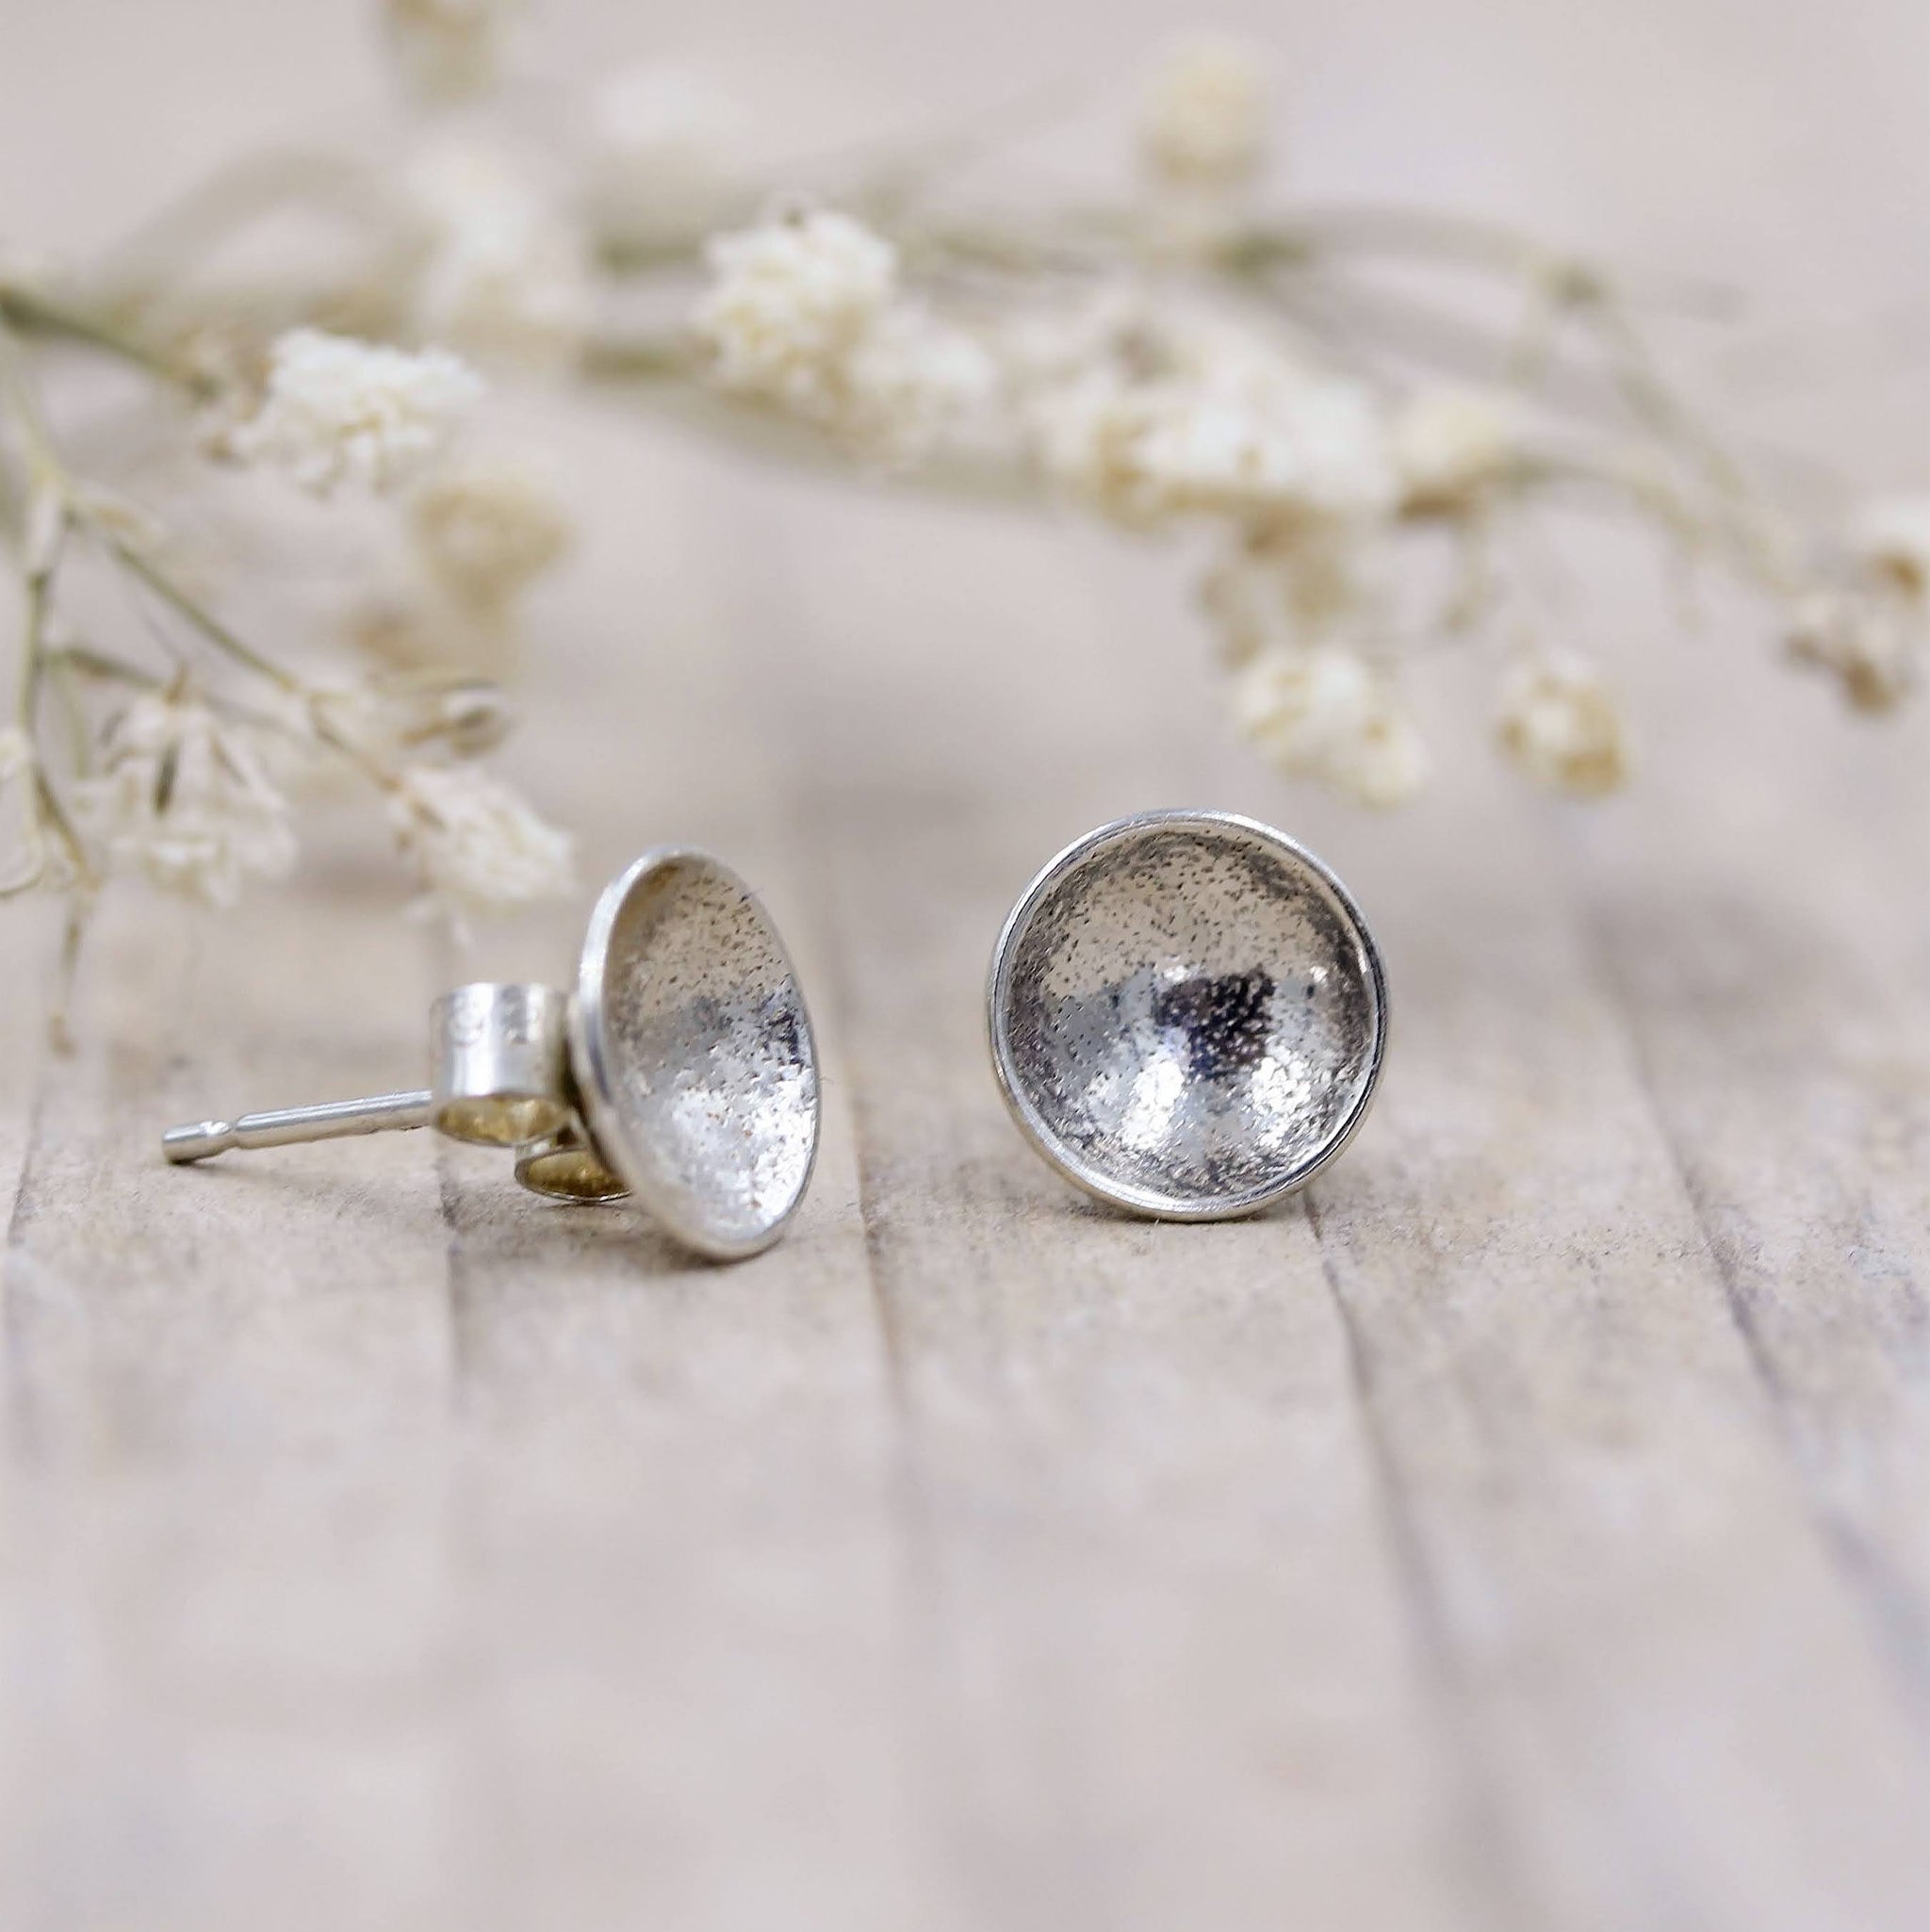 Sand textured stud earrings handmade in recycled silver by Gemma Tremayne Jewellery